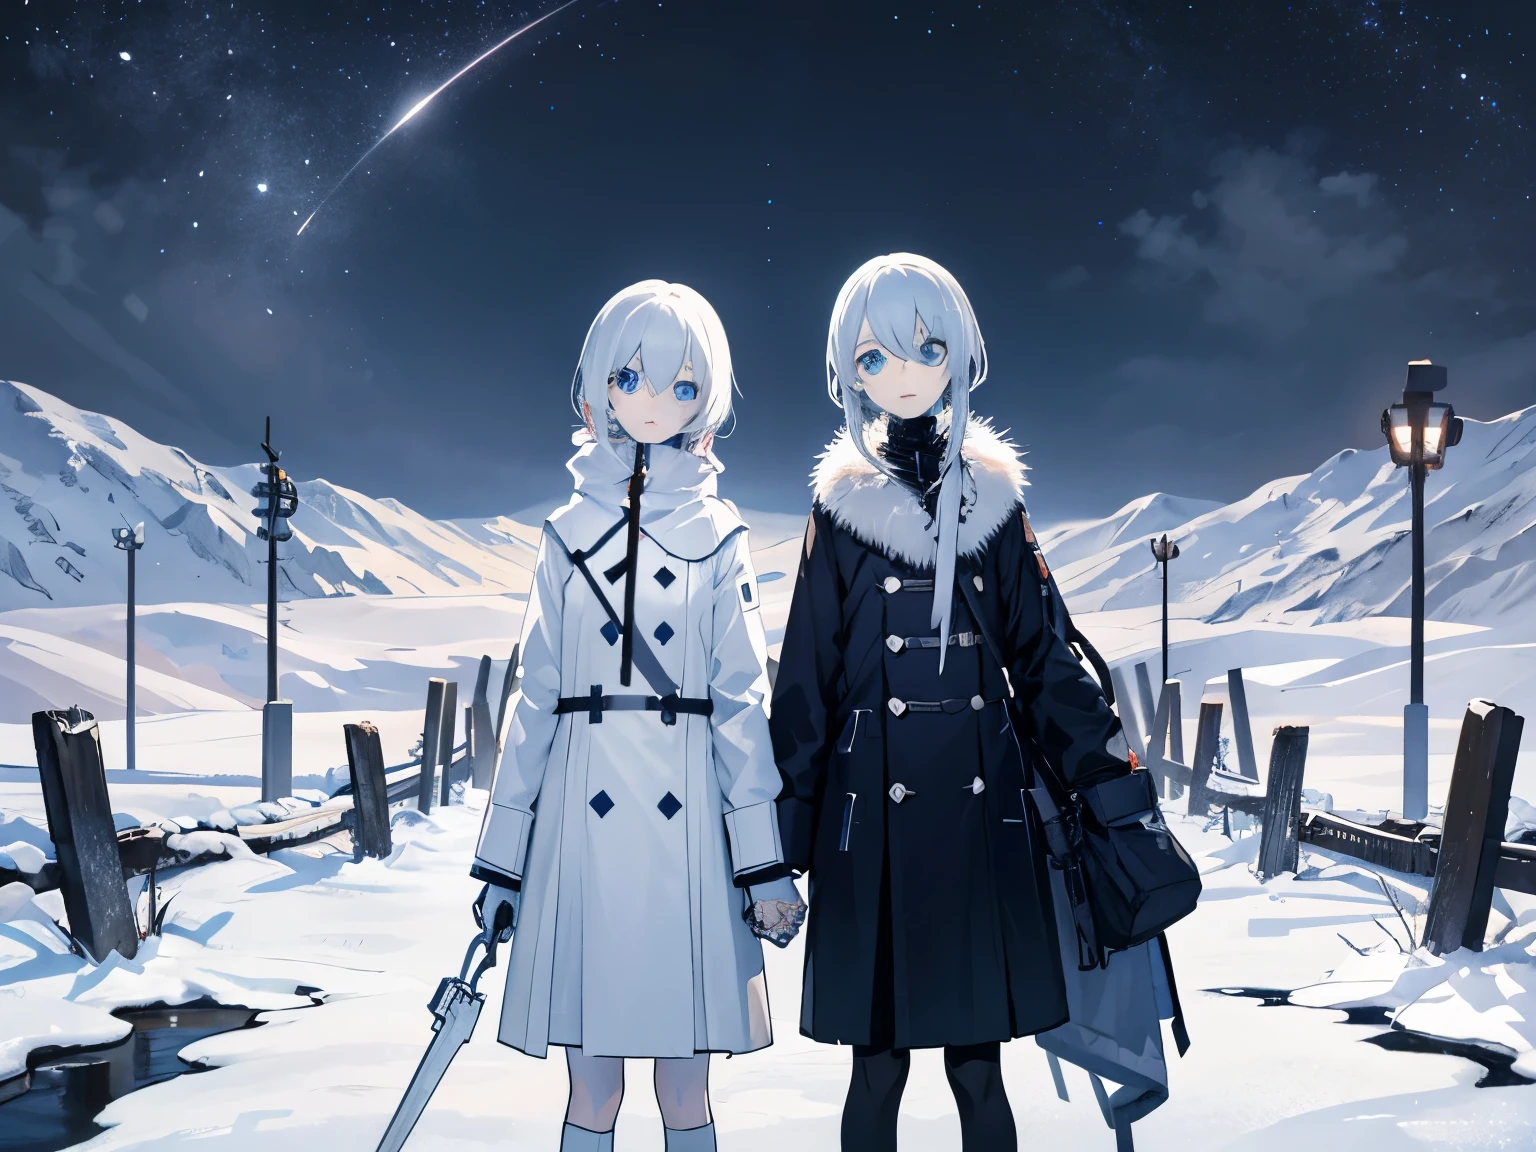 dystopian twins,hold hands,same height,whiteい髪,blue eyes,Winter gear,desolation,night,despair,hollow,snow,white,decadence,Danmei,identical twins,A world of just two,,masterpiece,Highest image quality,Key Visual